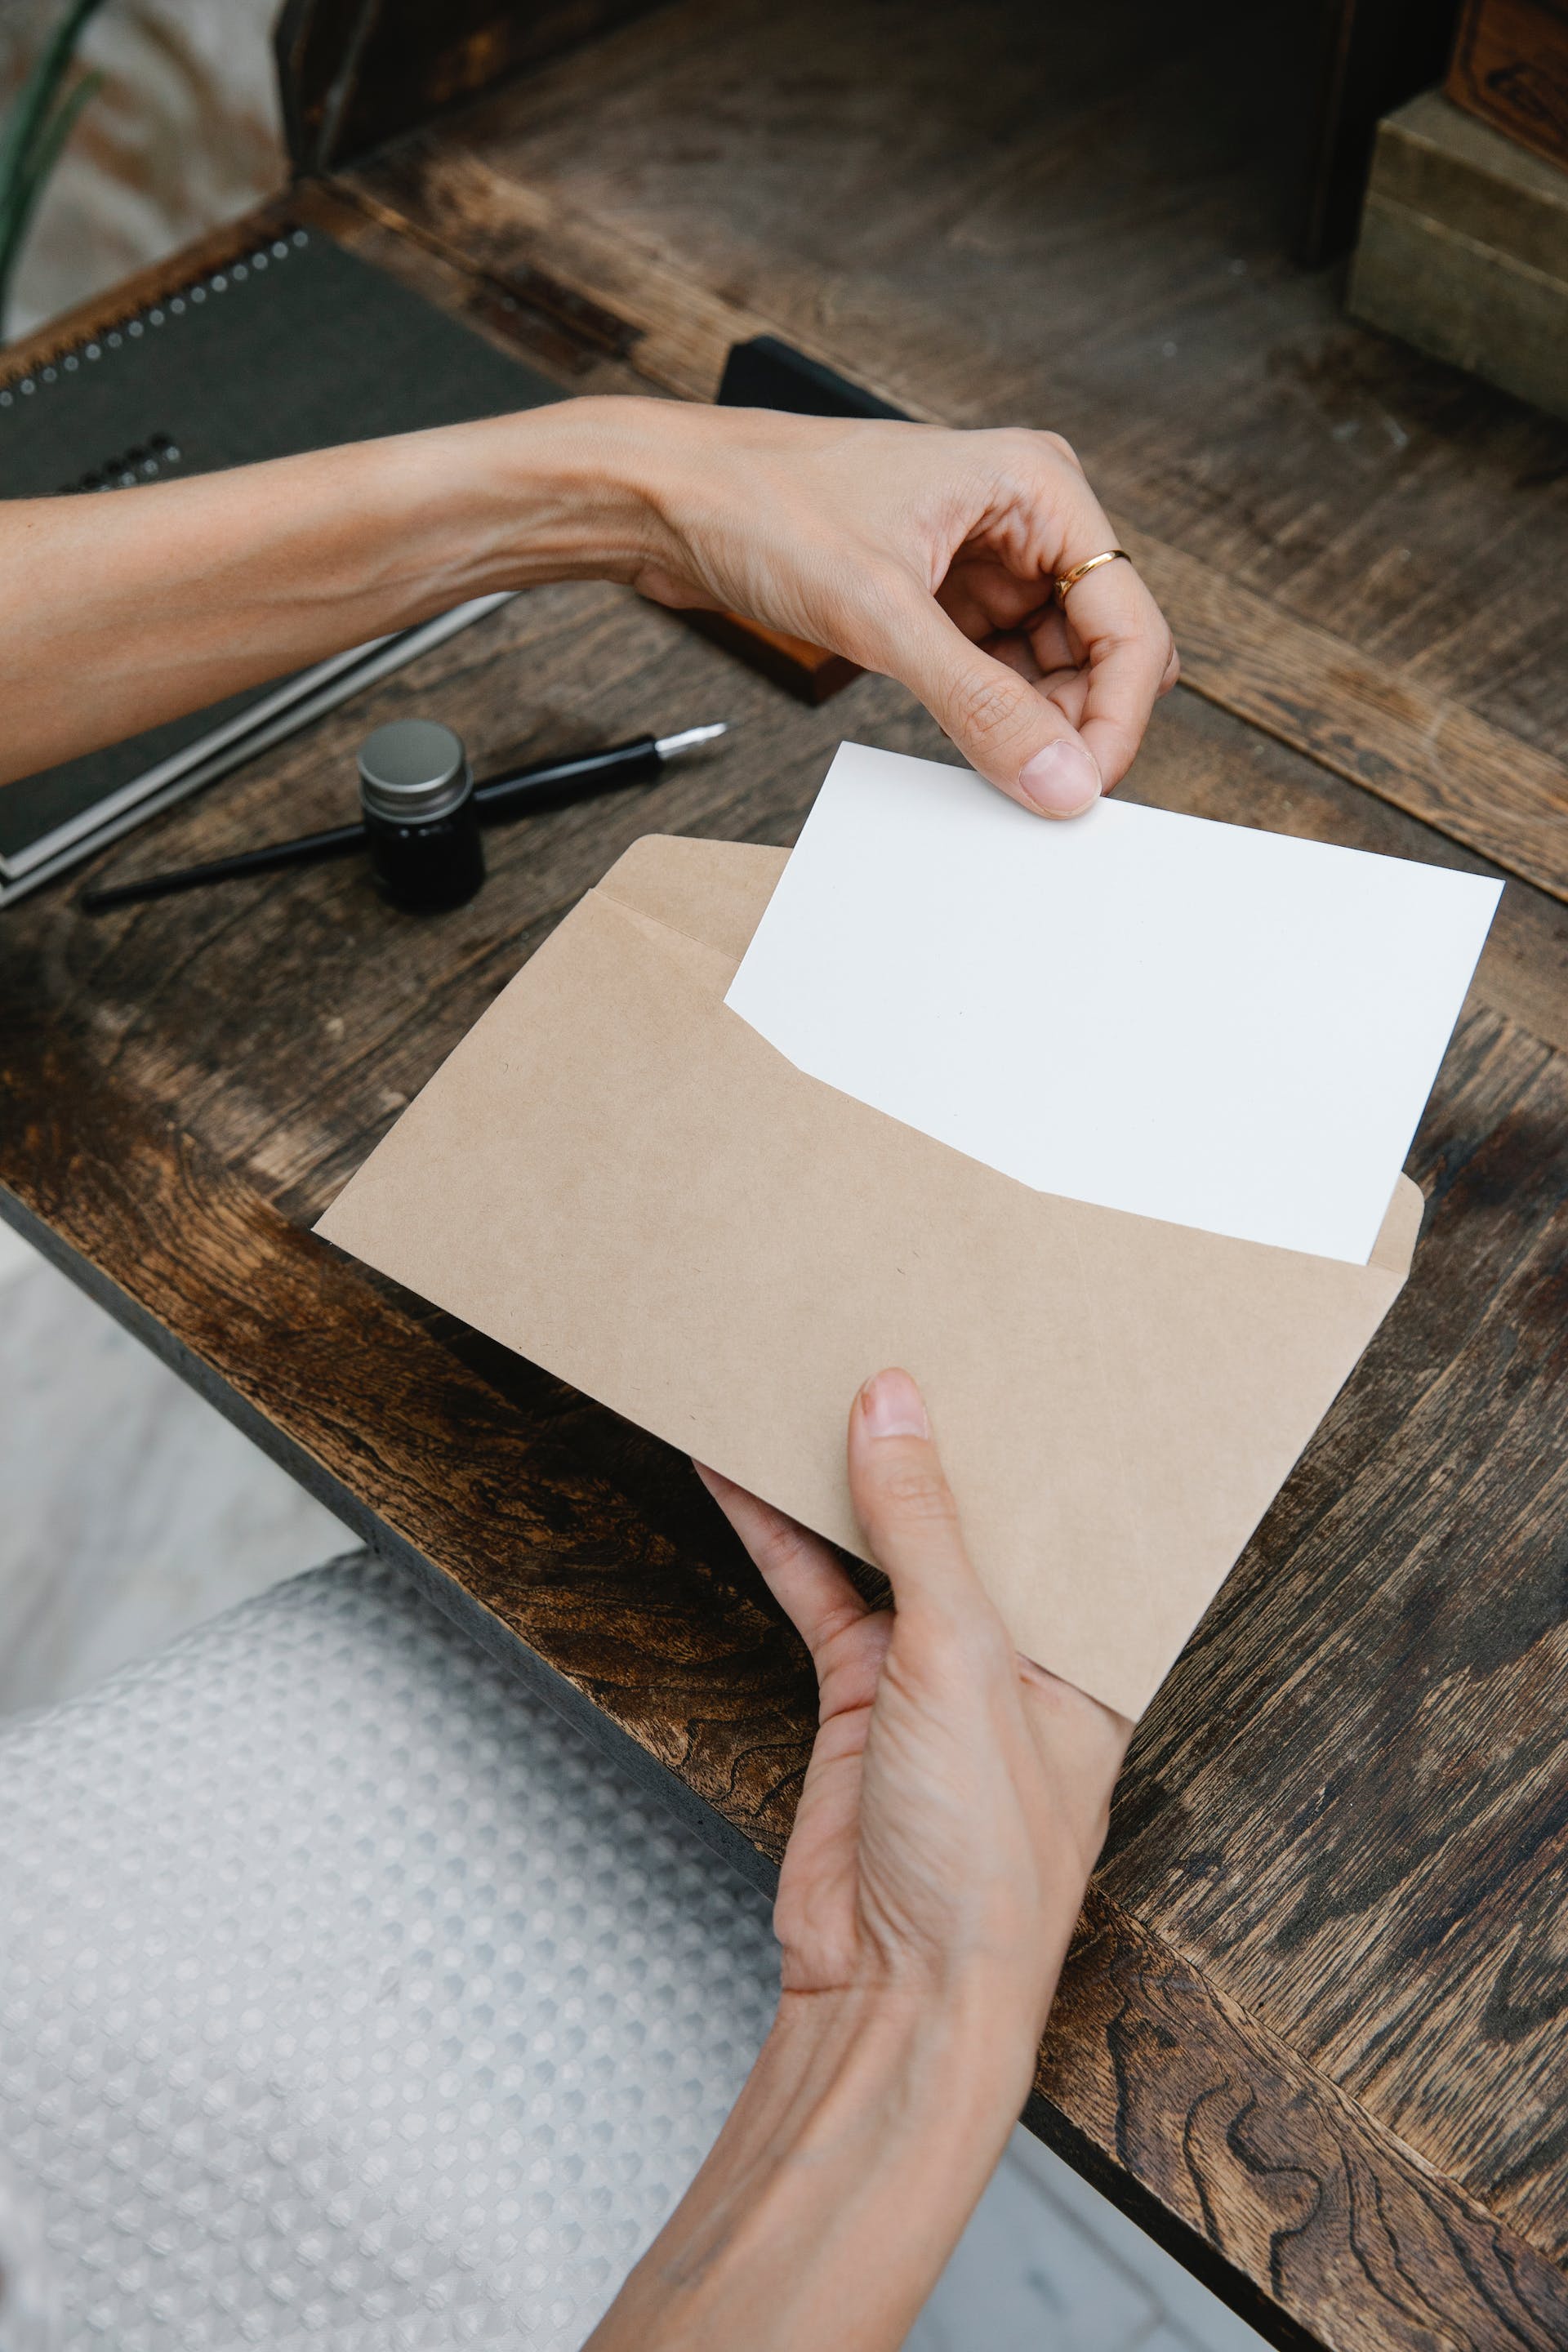 Person opening an envelope | Source: Pexels